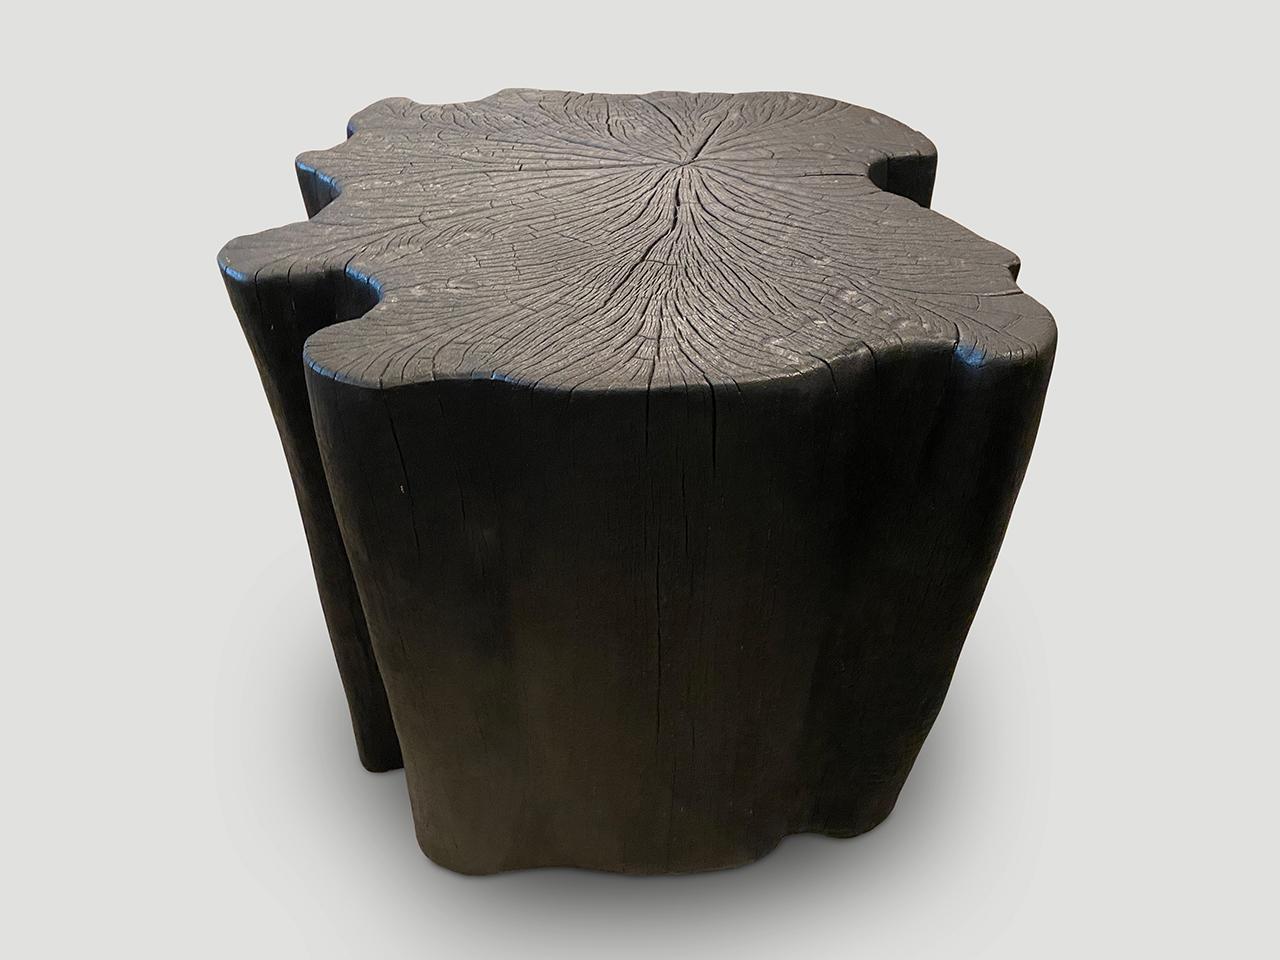 Reclaimed lychee wood side table. Burnt, sanded and sealed whilst respecting the natural organic shape and revealing the beautiful wood grain. We have a collection. All unique. The price and images reflect the one shown.

The Triple Burnt